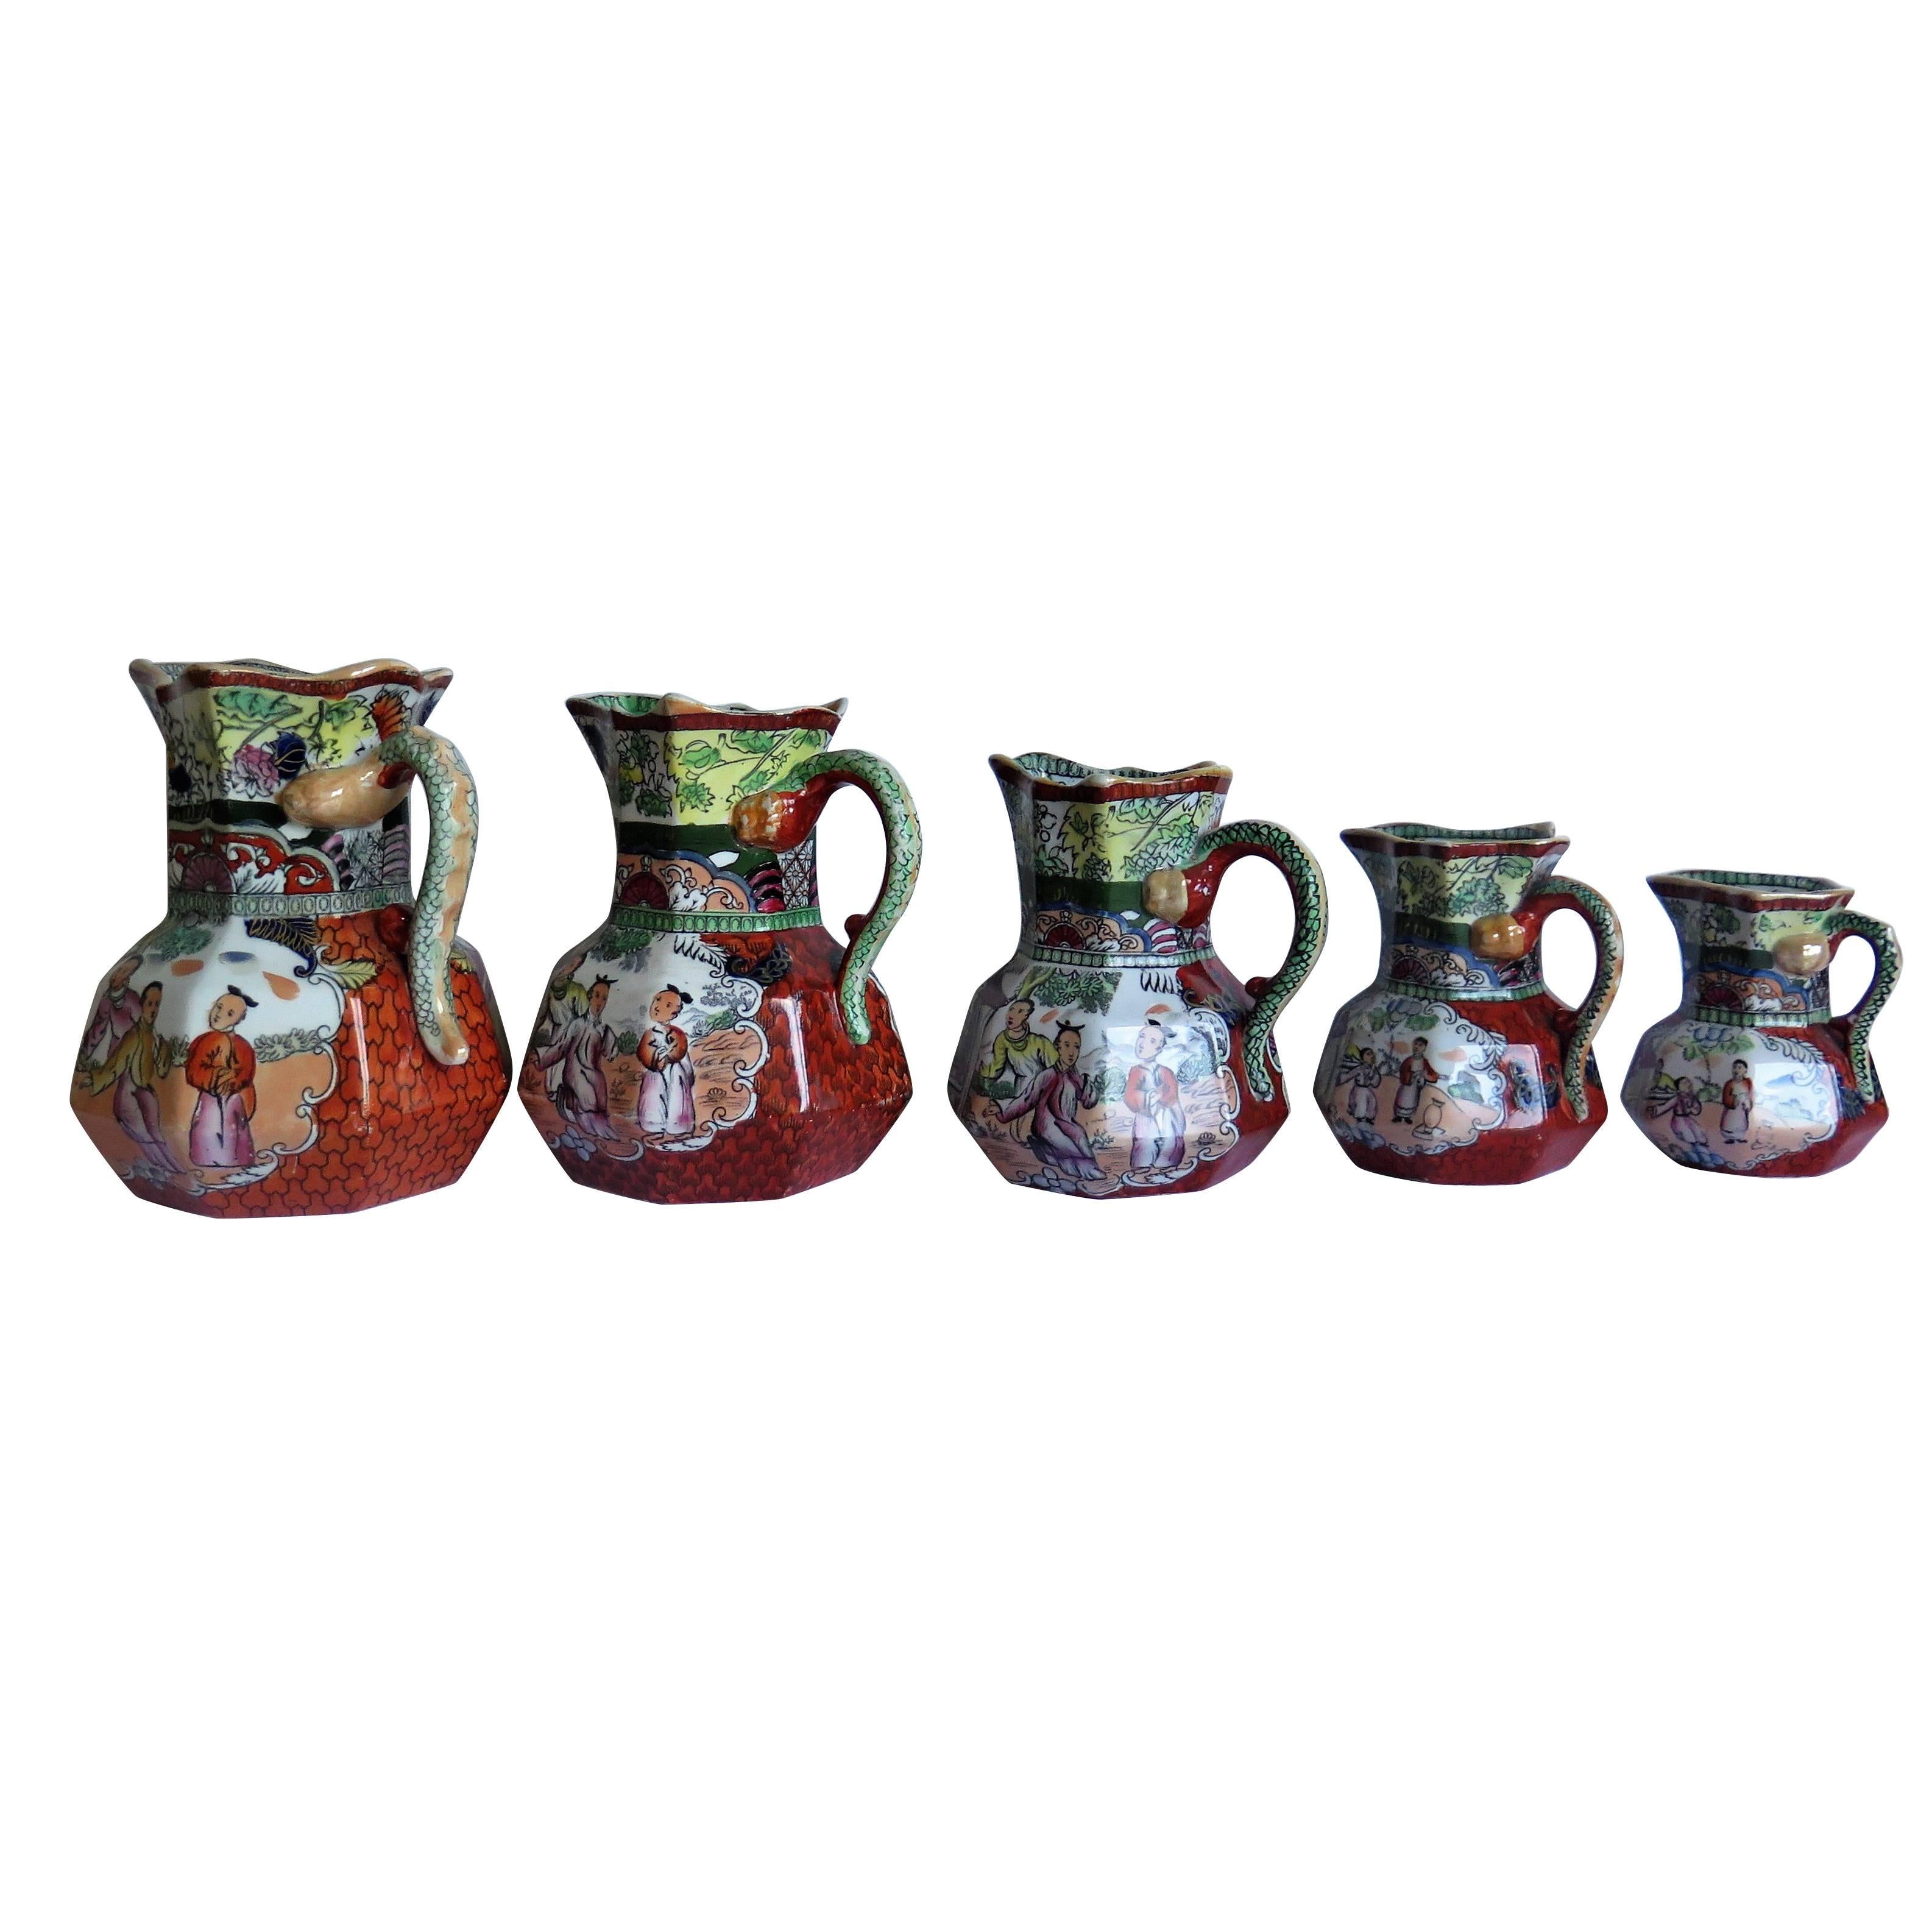 Rare Set of Five Mason's Ironstone Jugs or Pitchers, Red Scale Pattern, ca 1840